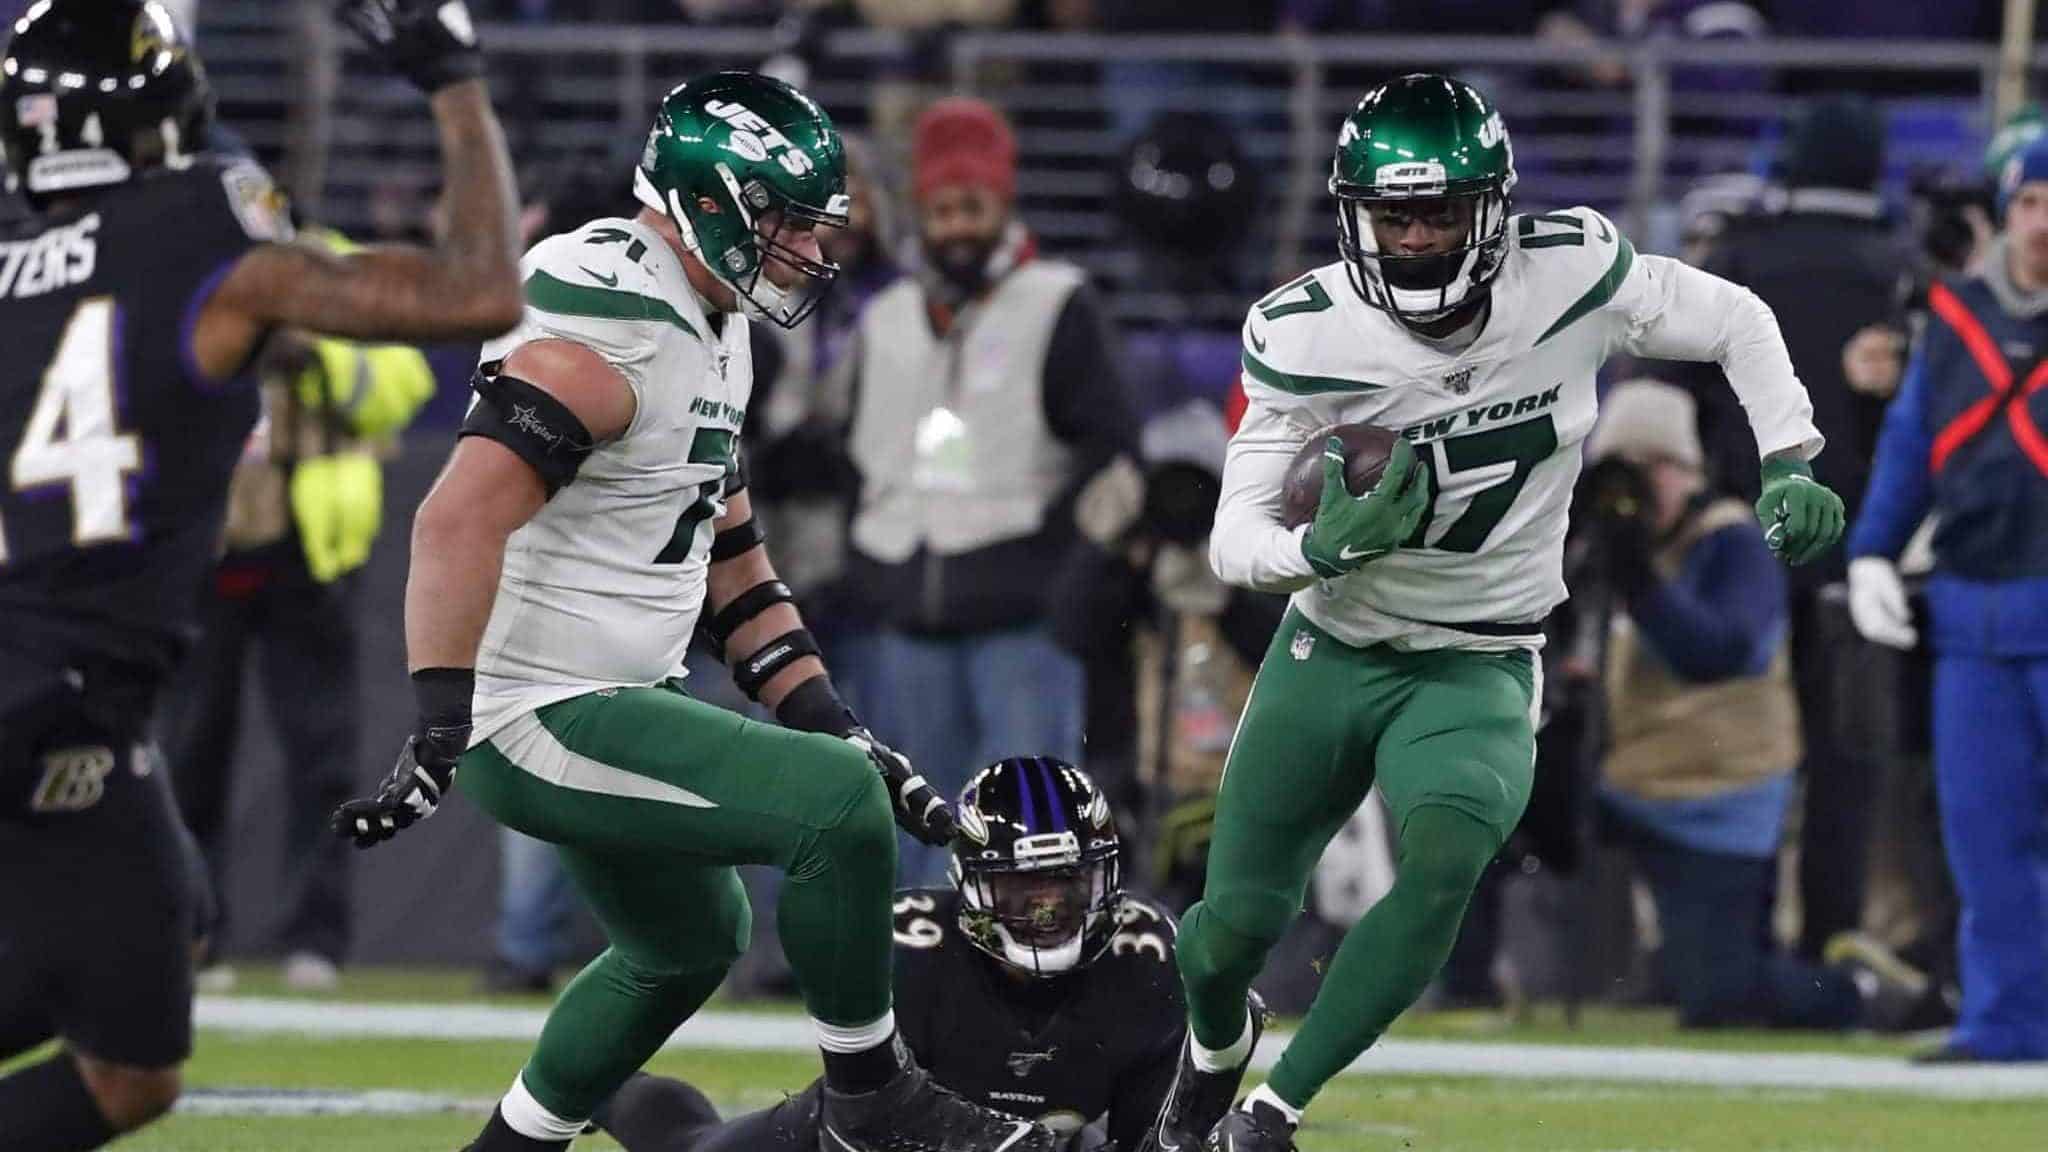 BALTIMORE, MARYLAND - DECEMBER 12: Wide Receiver Vyncint Smith #17 of the New York Jets runs with the ball during the second quarter against the Baltimore Ravens at M&T Bank Stadium on December 12, 2019 in Baltimore, Maryland.